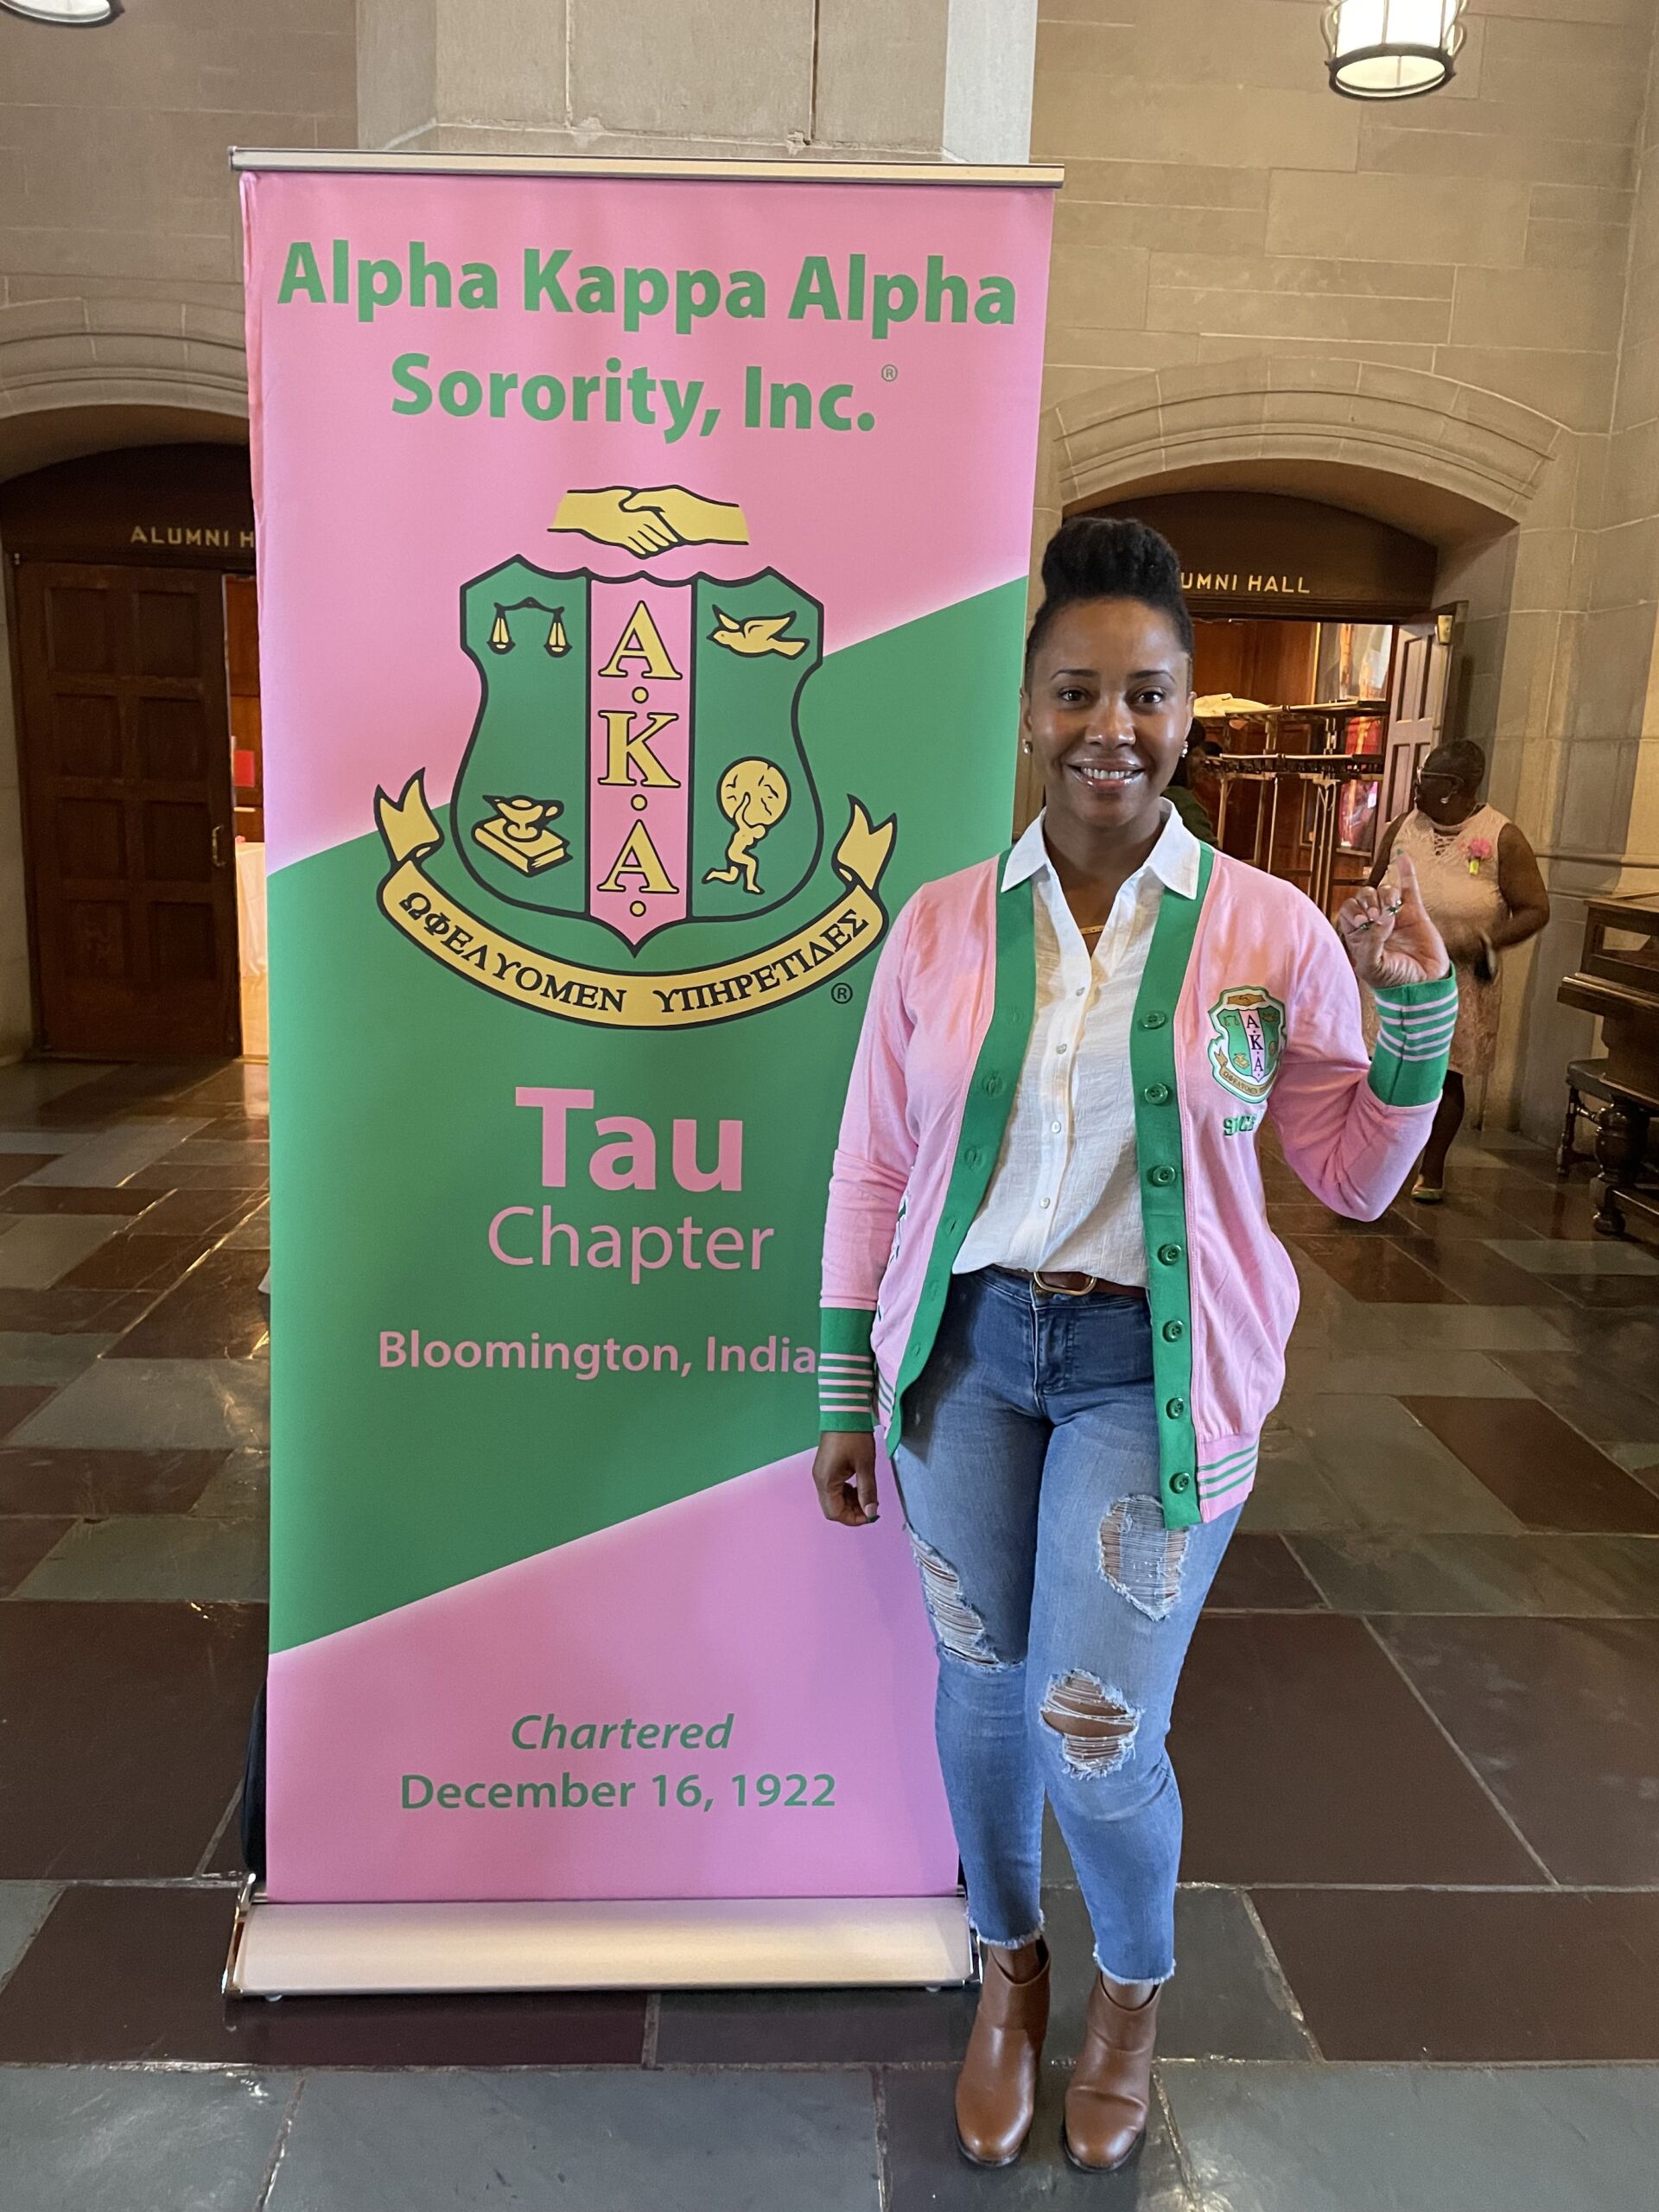 bennett posed in a pink and green cardigan, white button up, and jeans with her pinky up representing her sorority, Alpha Kappa Alpha.